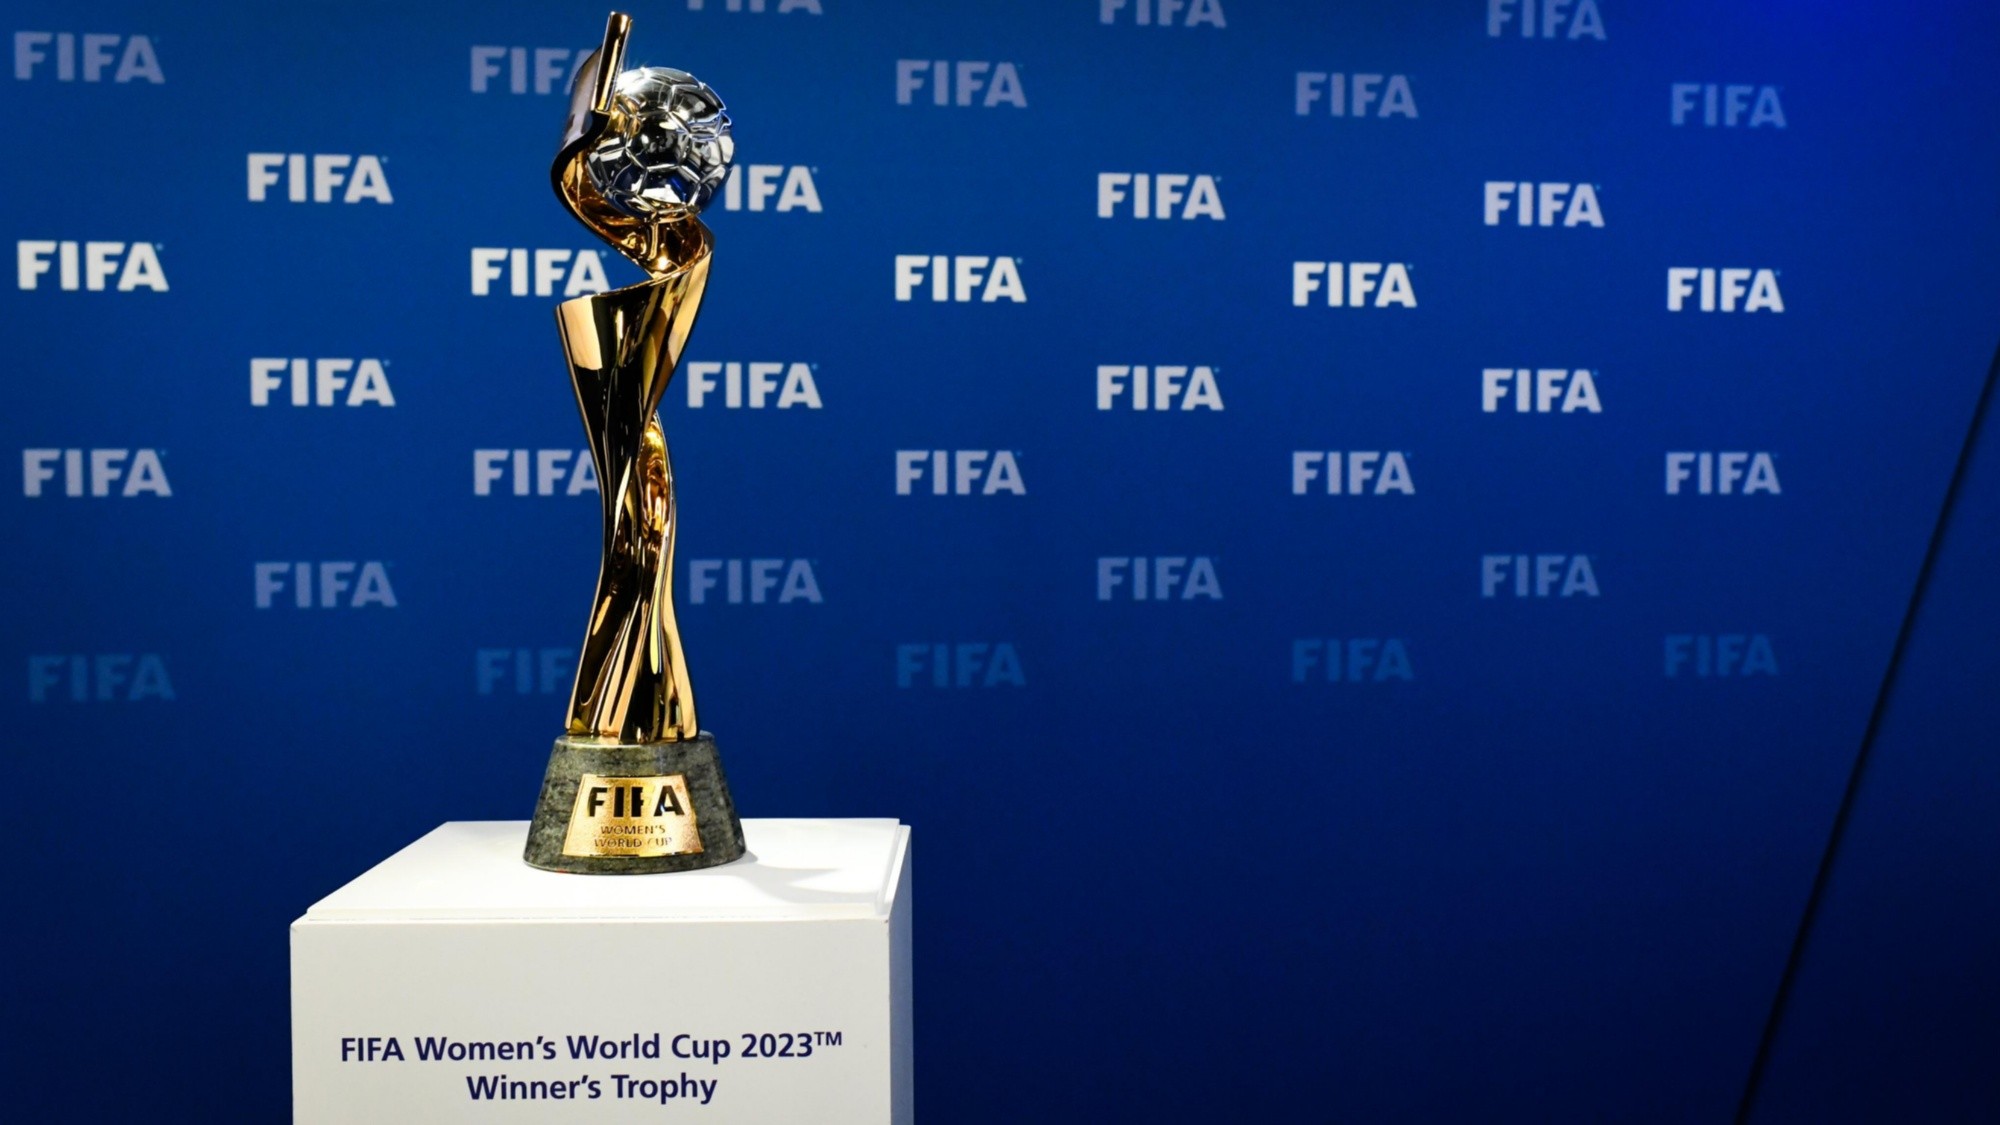  Women's Soccer World Cup and FIFA